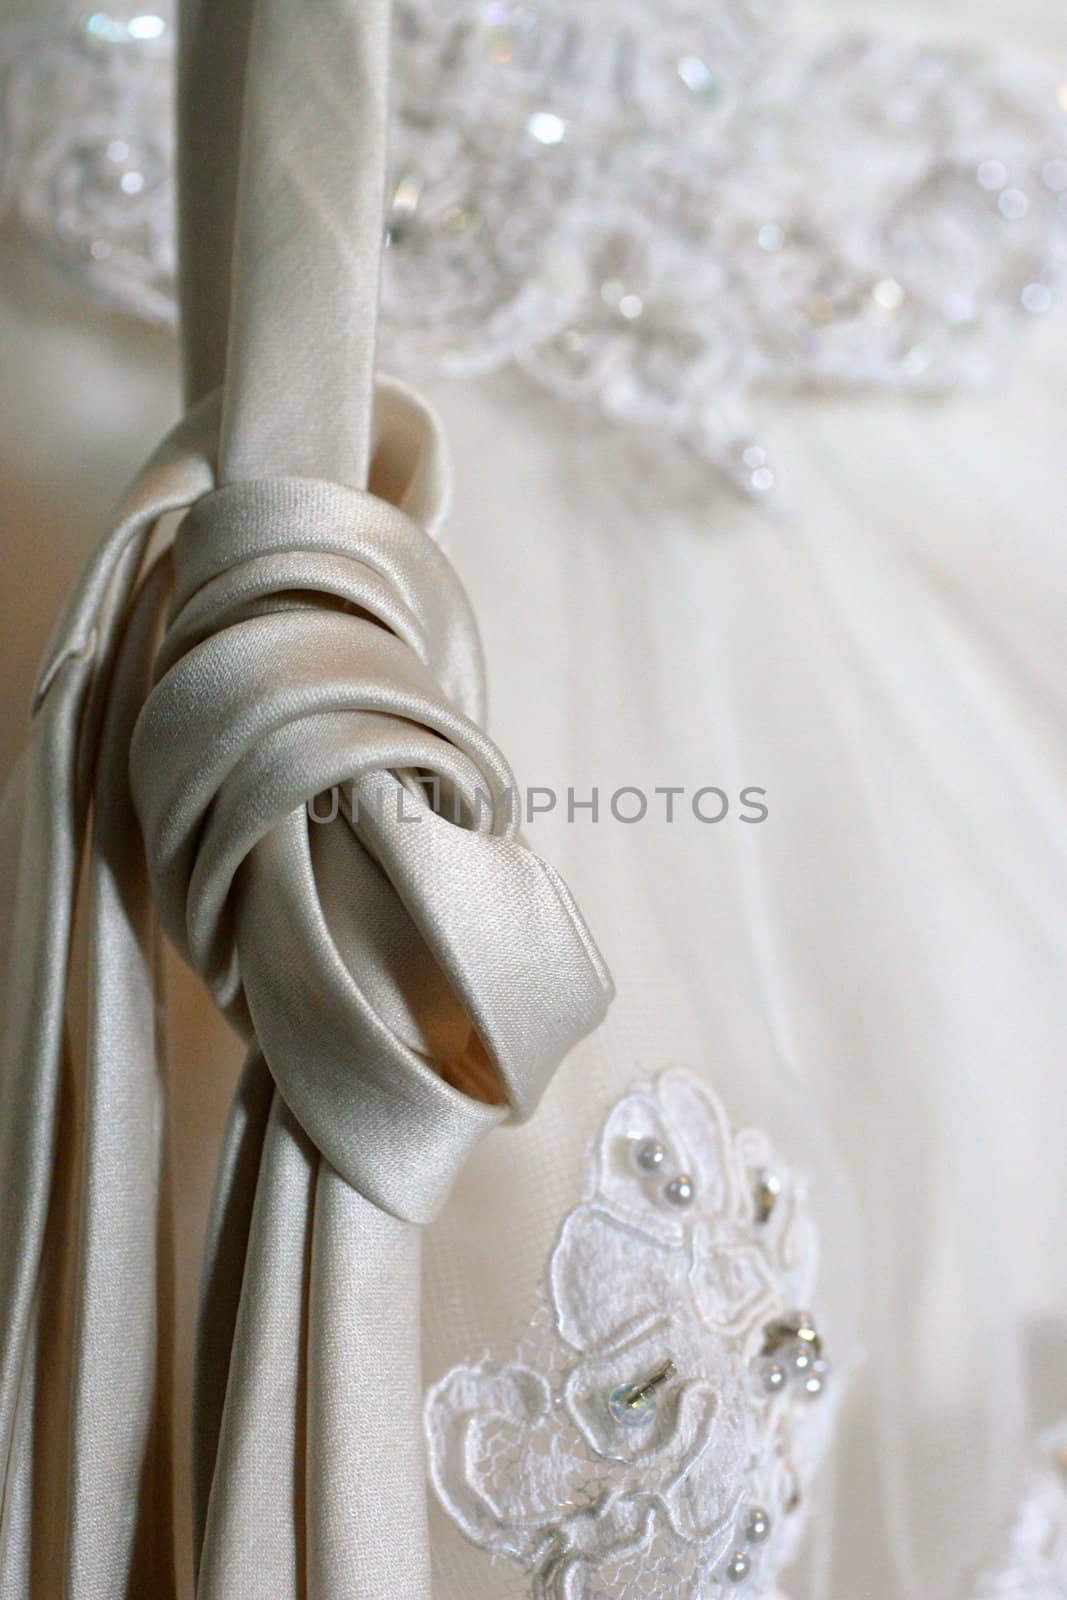 Laces of a wedding dress tied in a knot